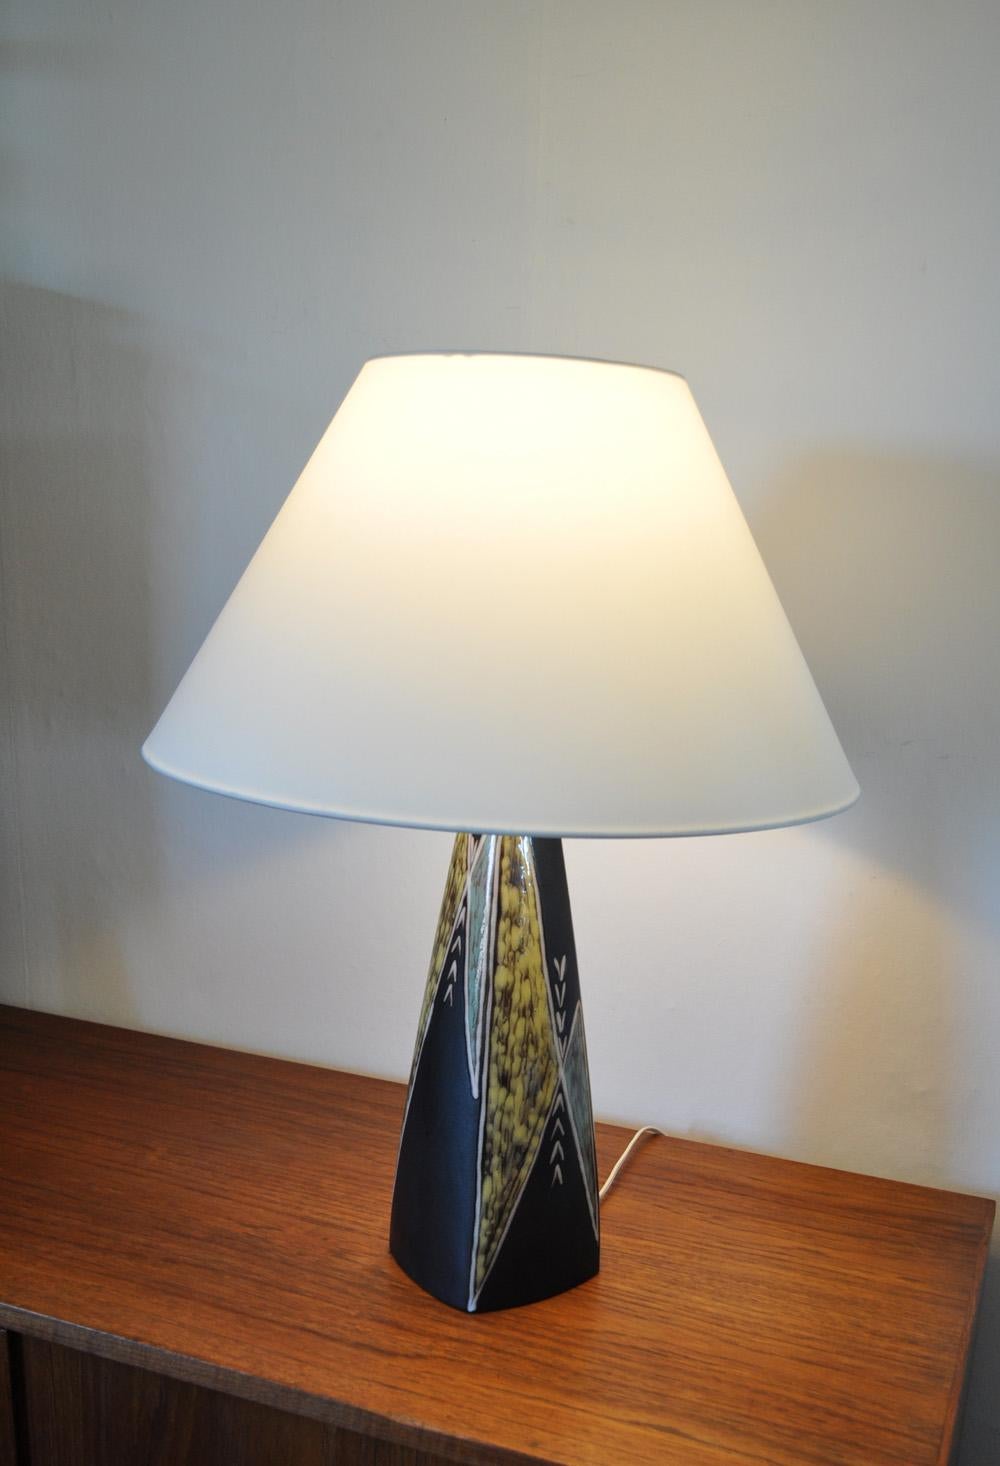 Danish Large Ceramic Table Lamp by Svend Aage Jensen for Søholm, 1950s For Sale